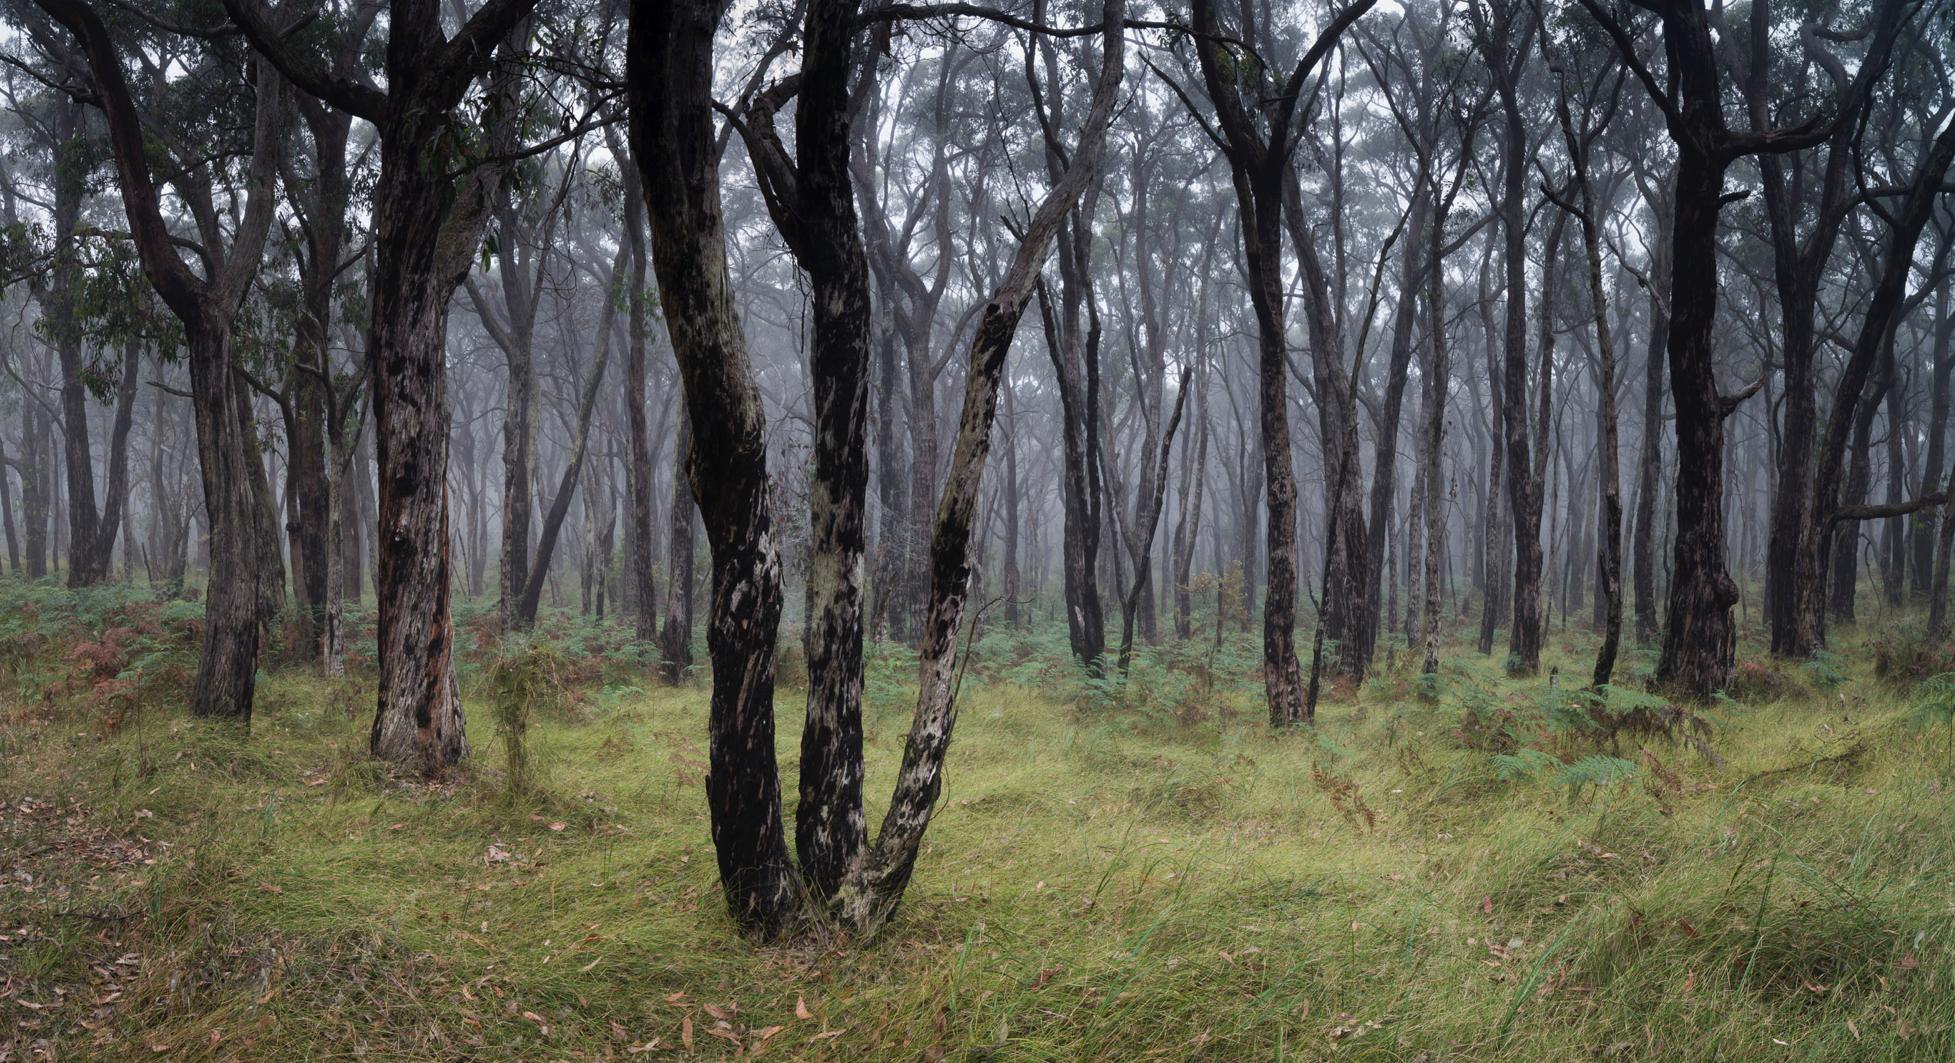 A green grassy surface with some nested branched trees, Winter Fog, Mornington Peninsula, VIC